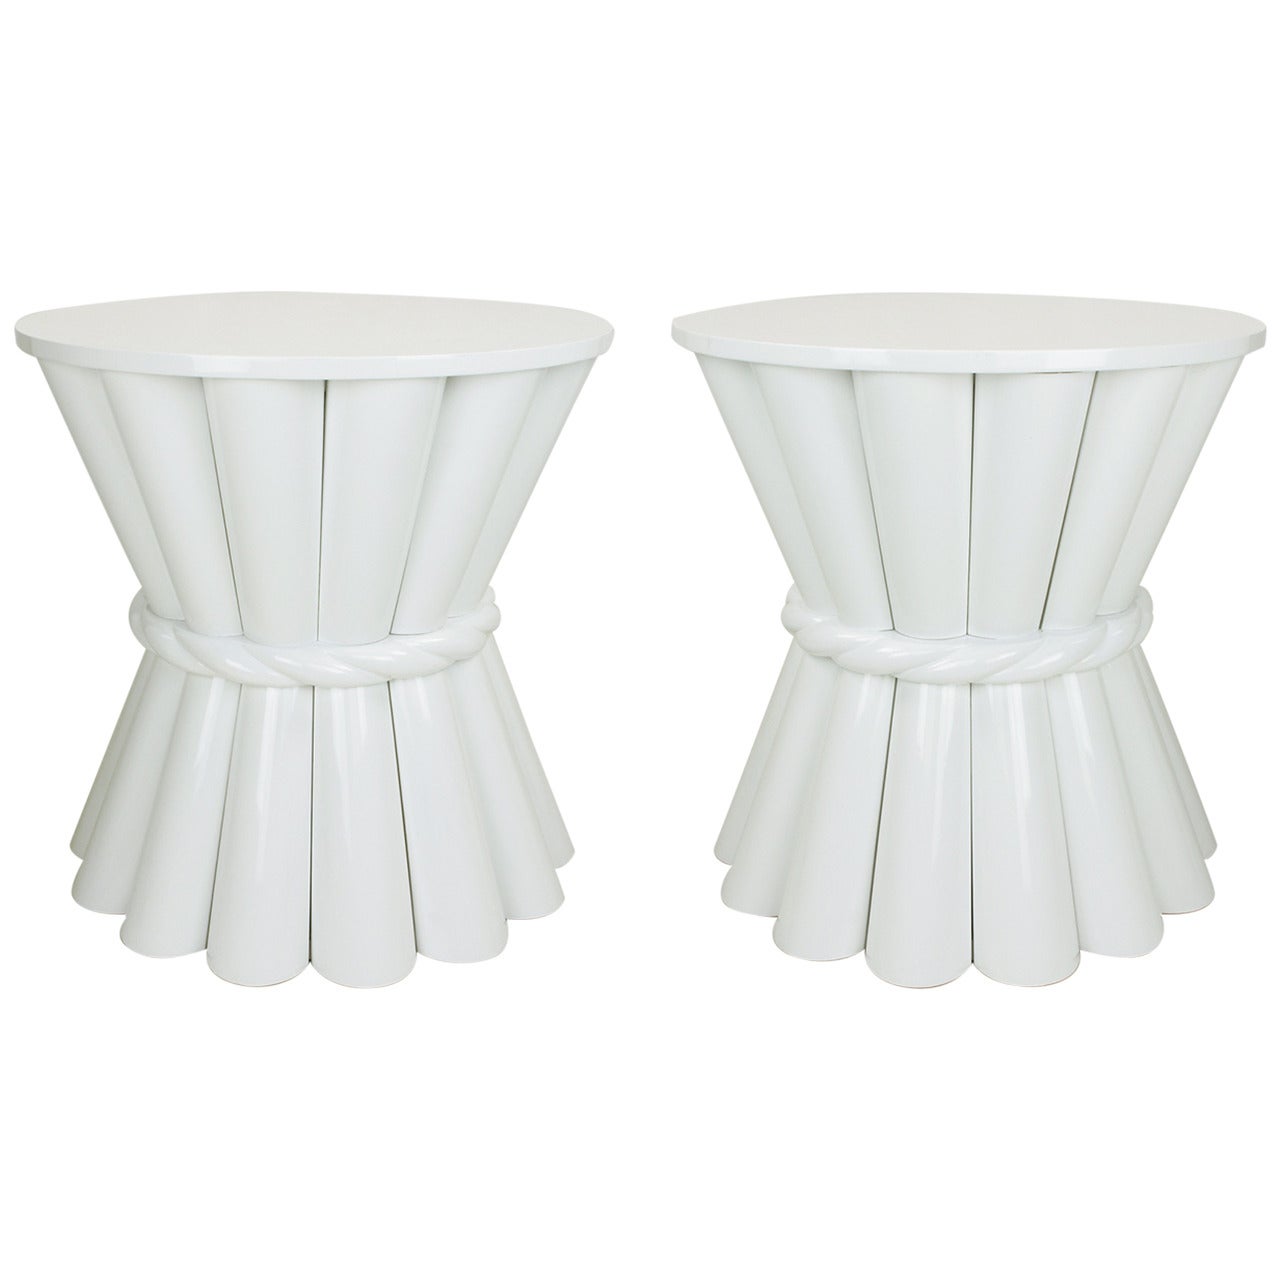 Pair of Studio Built White Gloss Lacquer "Sheaf of Wheat" Round End Tables